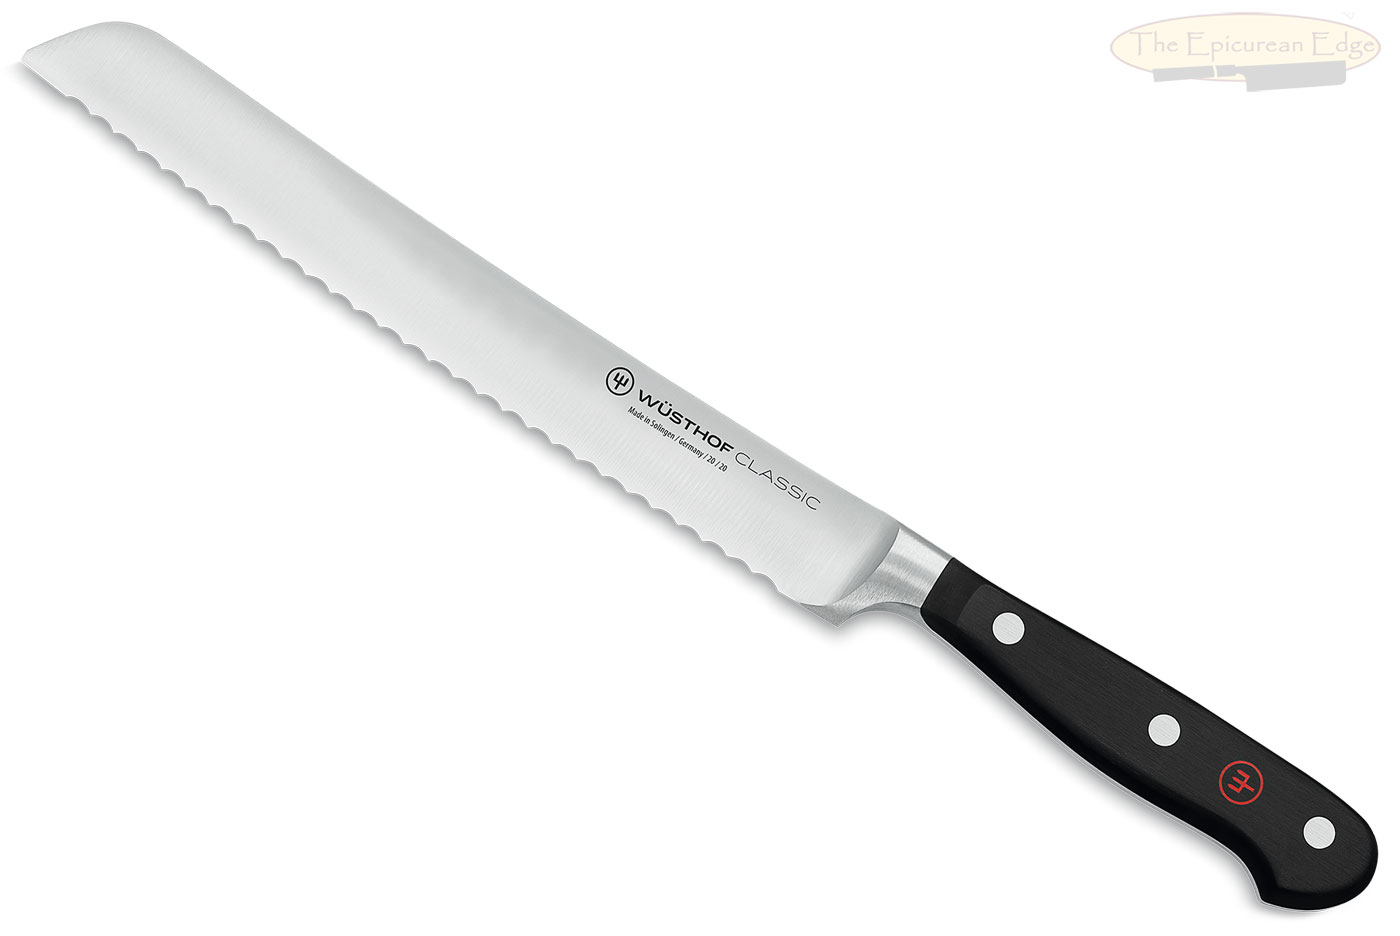 Wusthof-Trident Classic Serrated Bread Knife - 8 in. (1040101020)